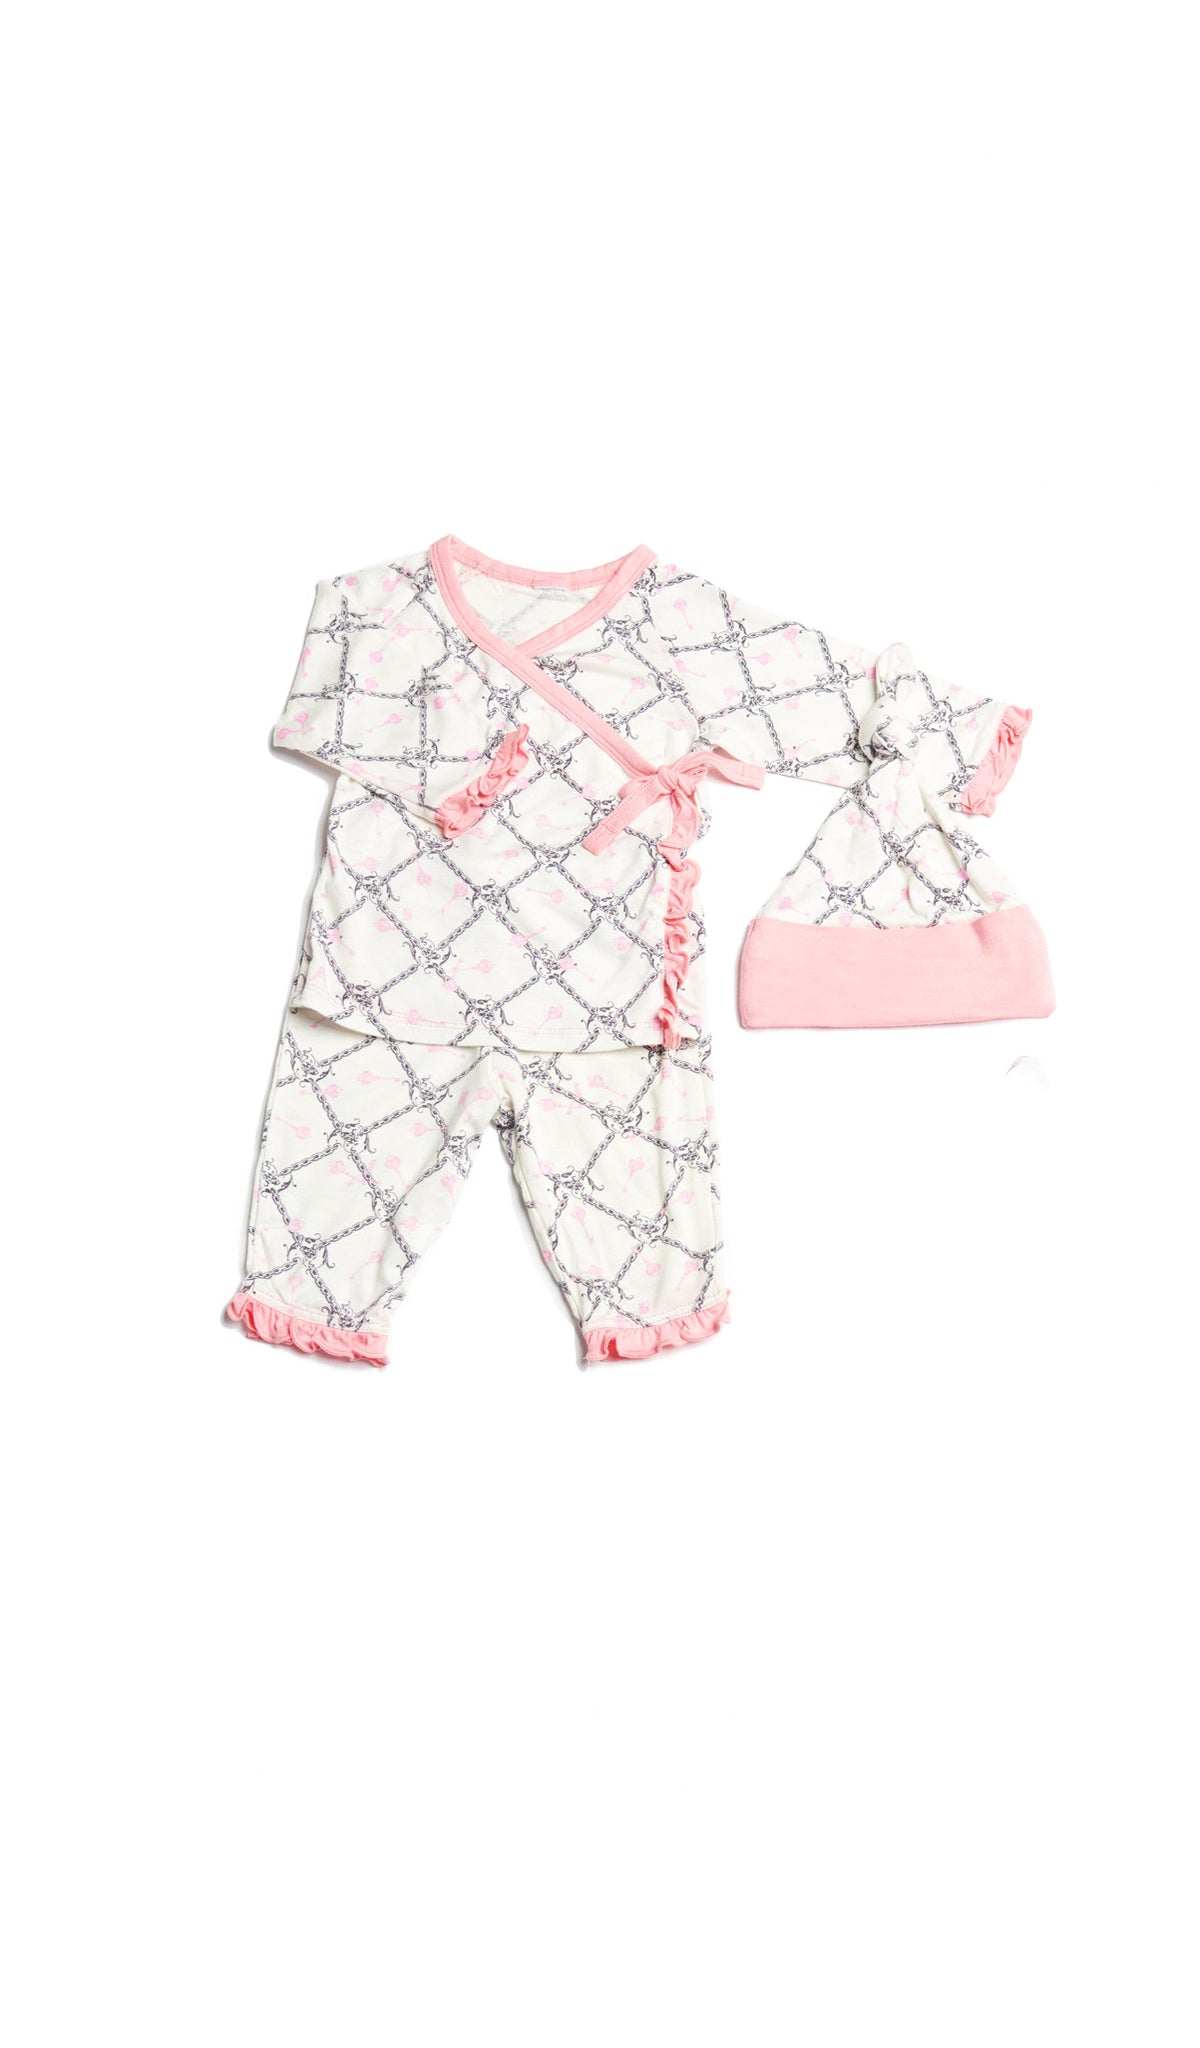 Duchess Baby's Ruffle Take-Me-Home 3 Piece set flat shot showing long sleeve kimono top and pant with ruffle trim, and matching knotted baby hat.